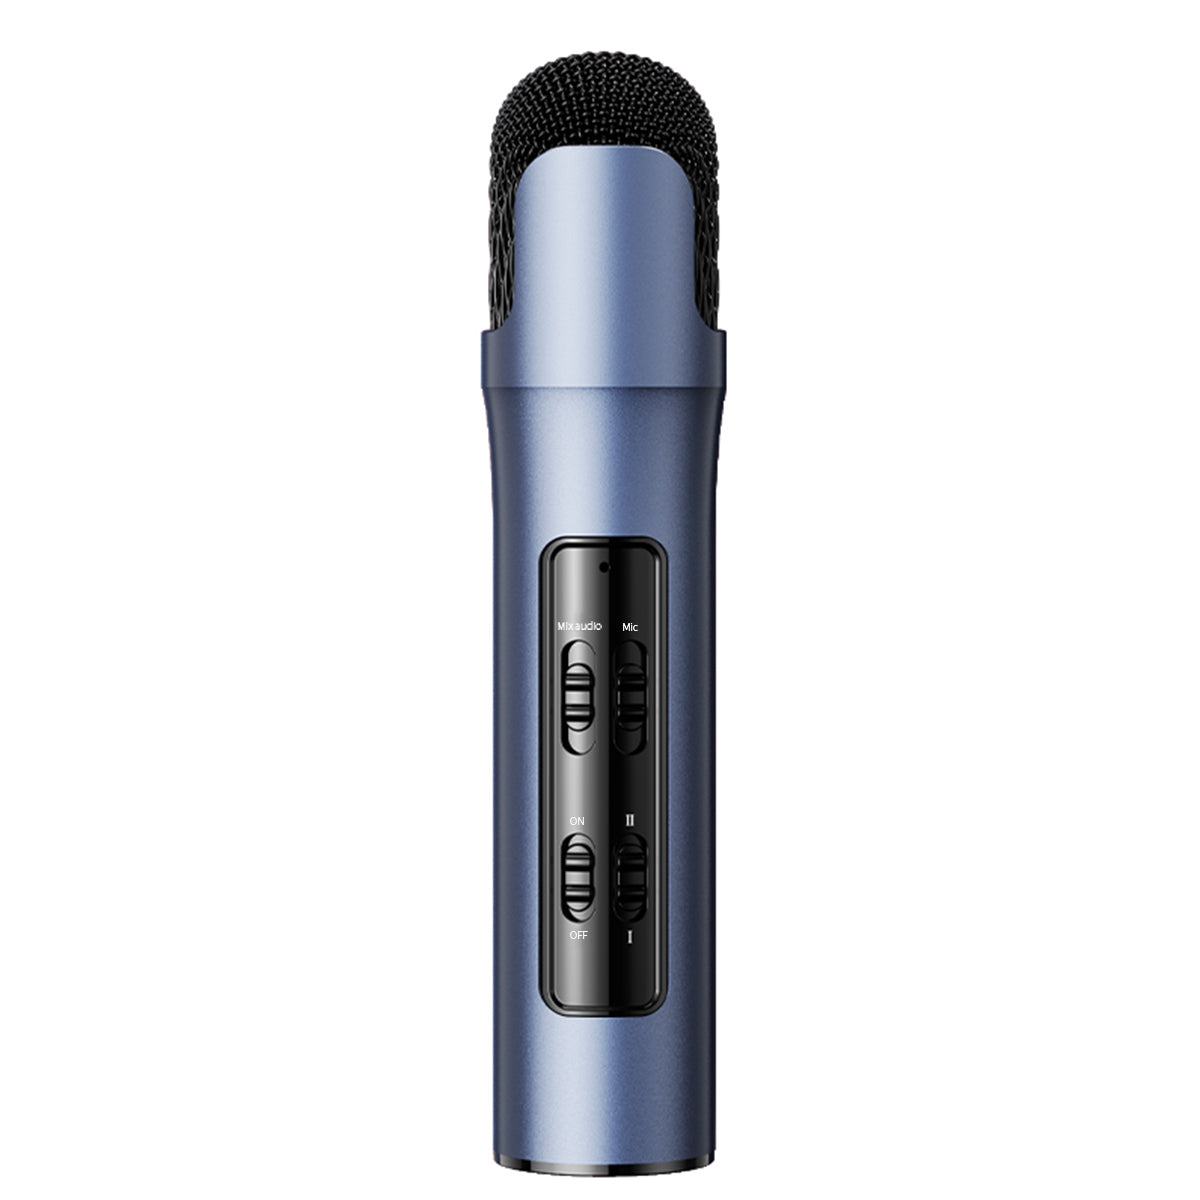 Nowmic Aluminum Alloy Body Professional Recording Microphone